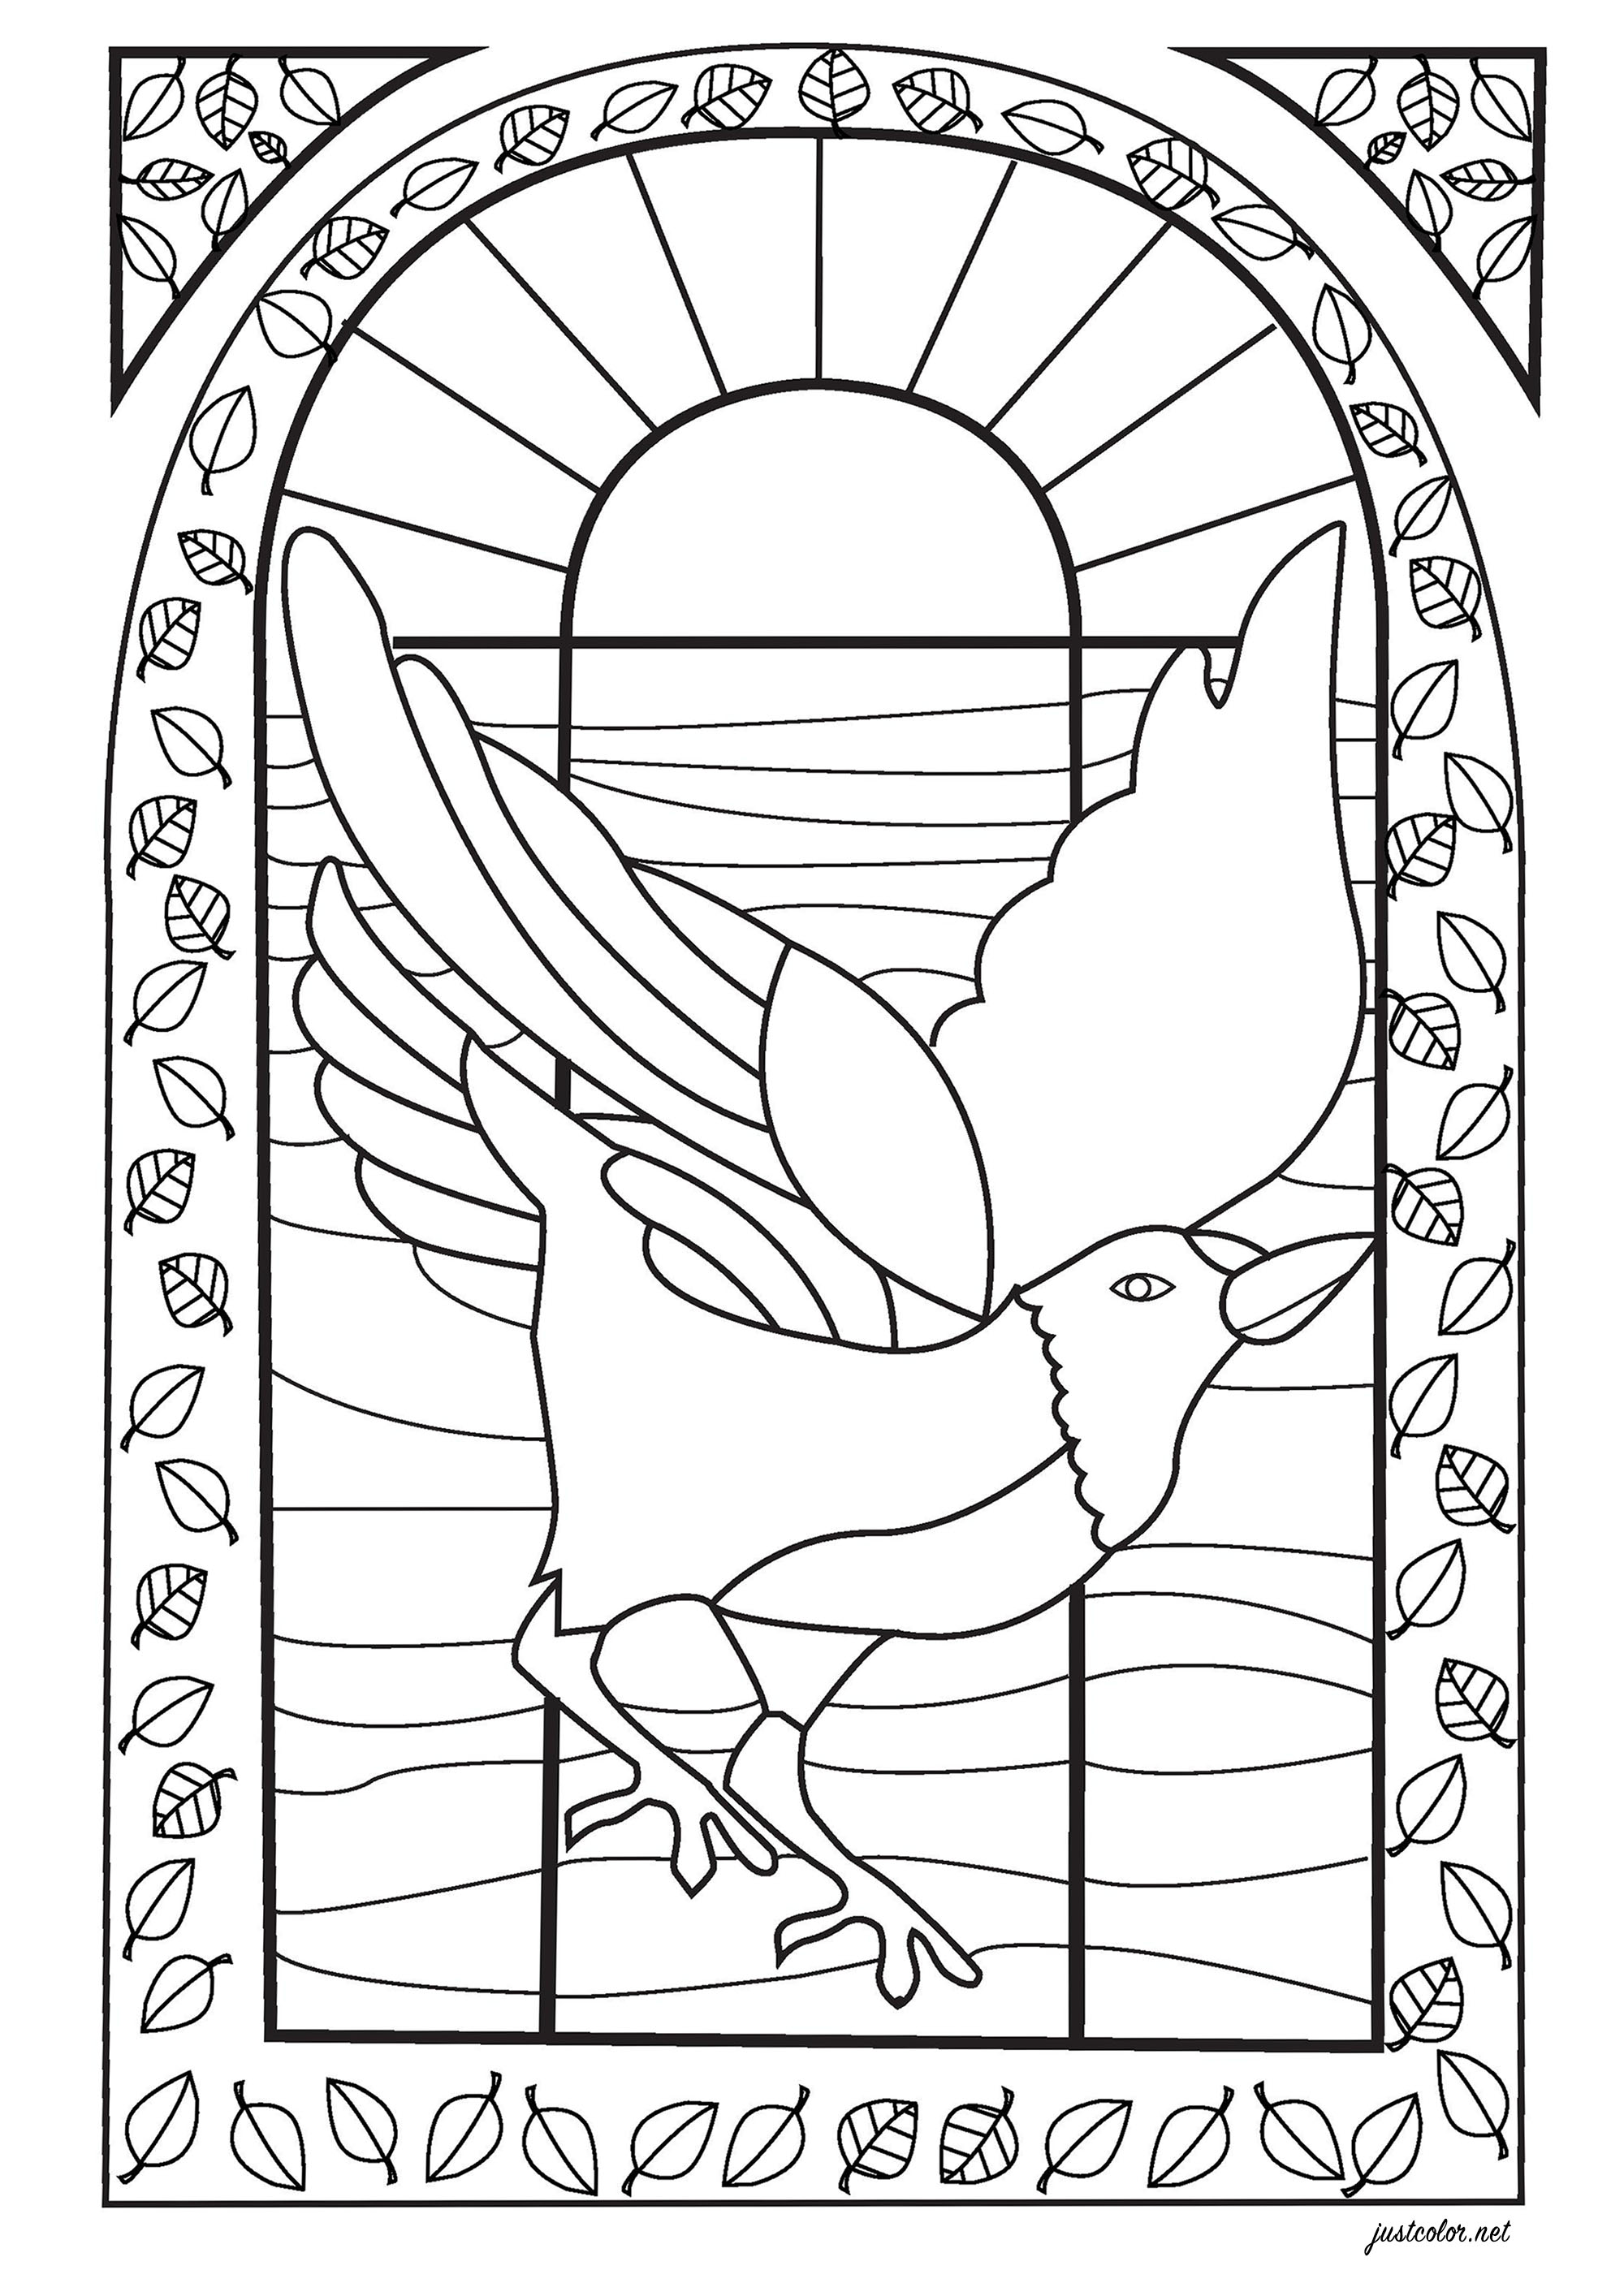 Drawing of a bird to color, drawn in the style of a stained glass window, Artist : Salomé T